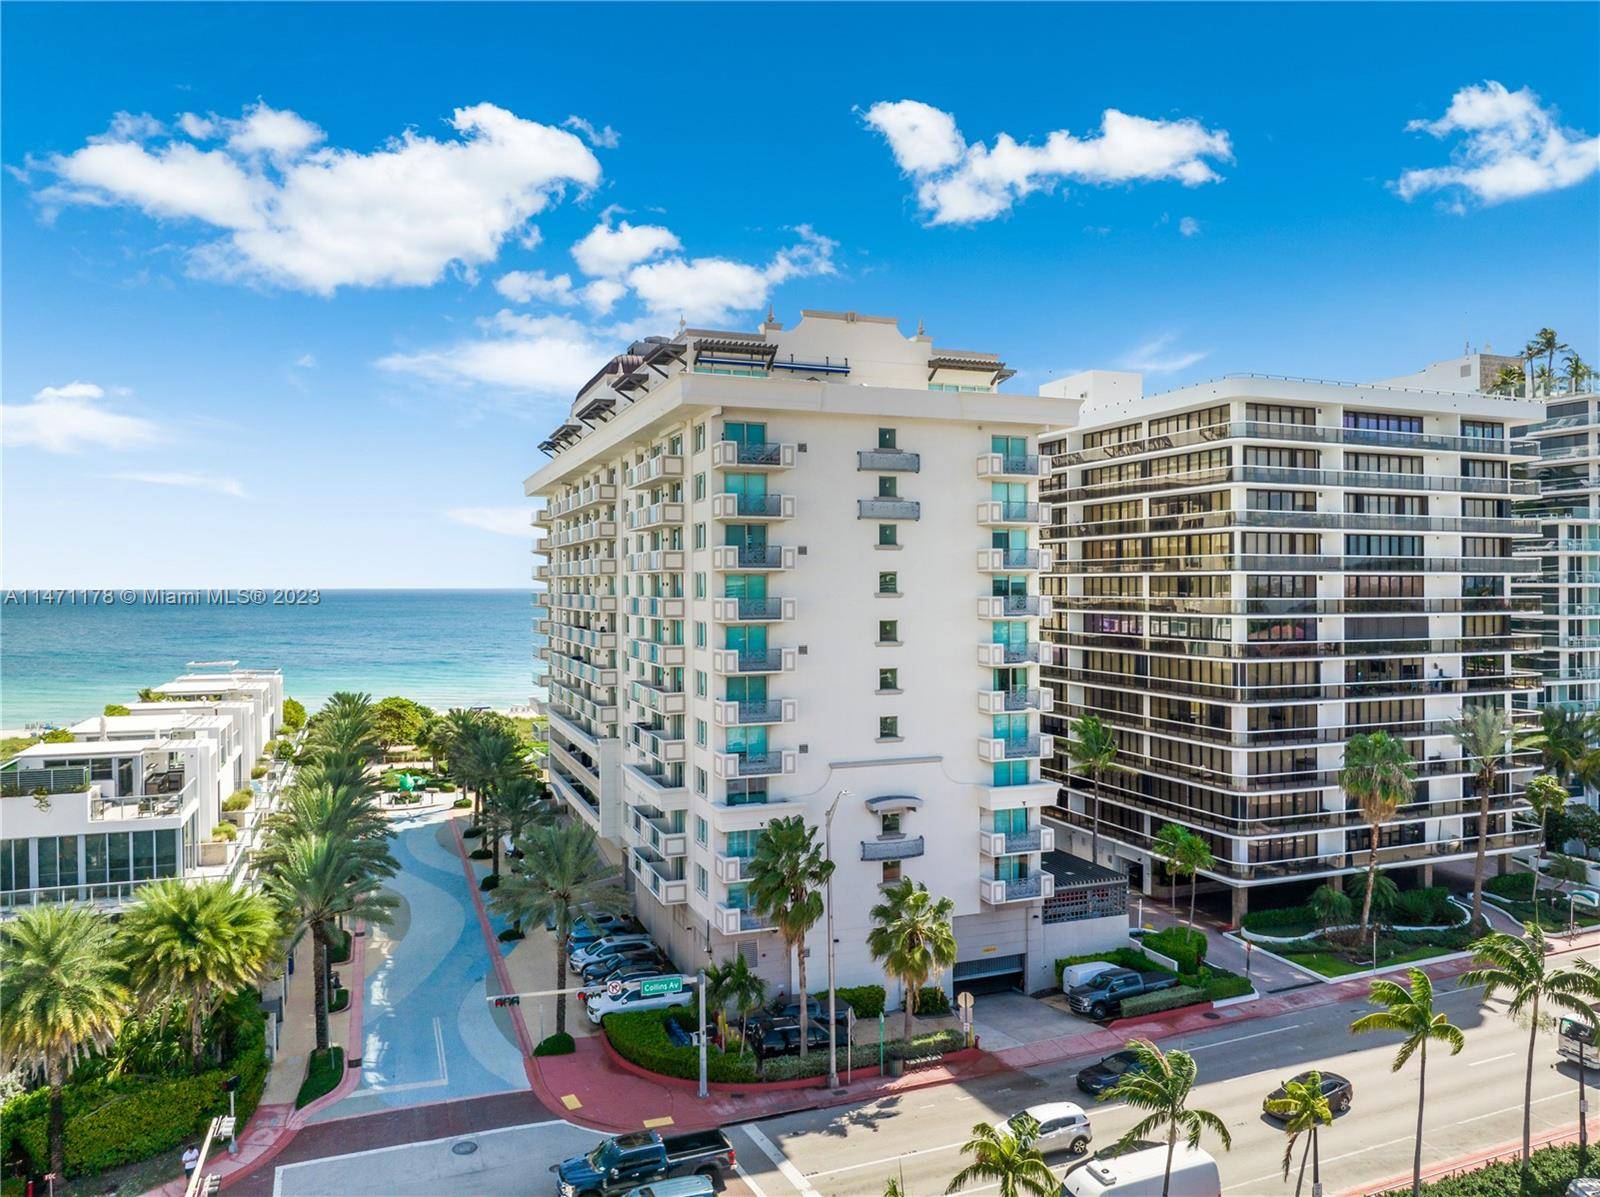 Opportunity to rent a large, fully furnished, 10th floor studio with partial ocean views in the heart of Surfside.